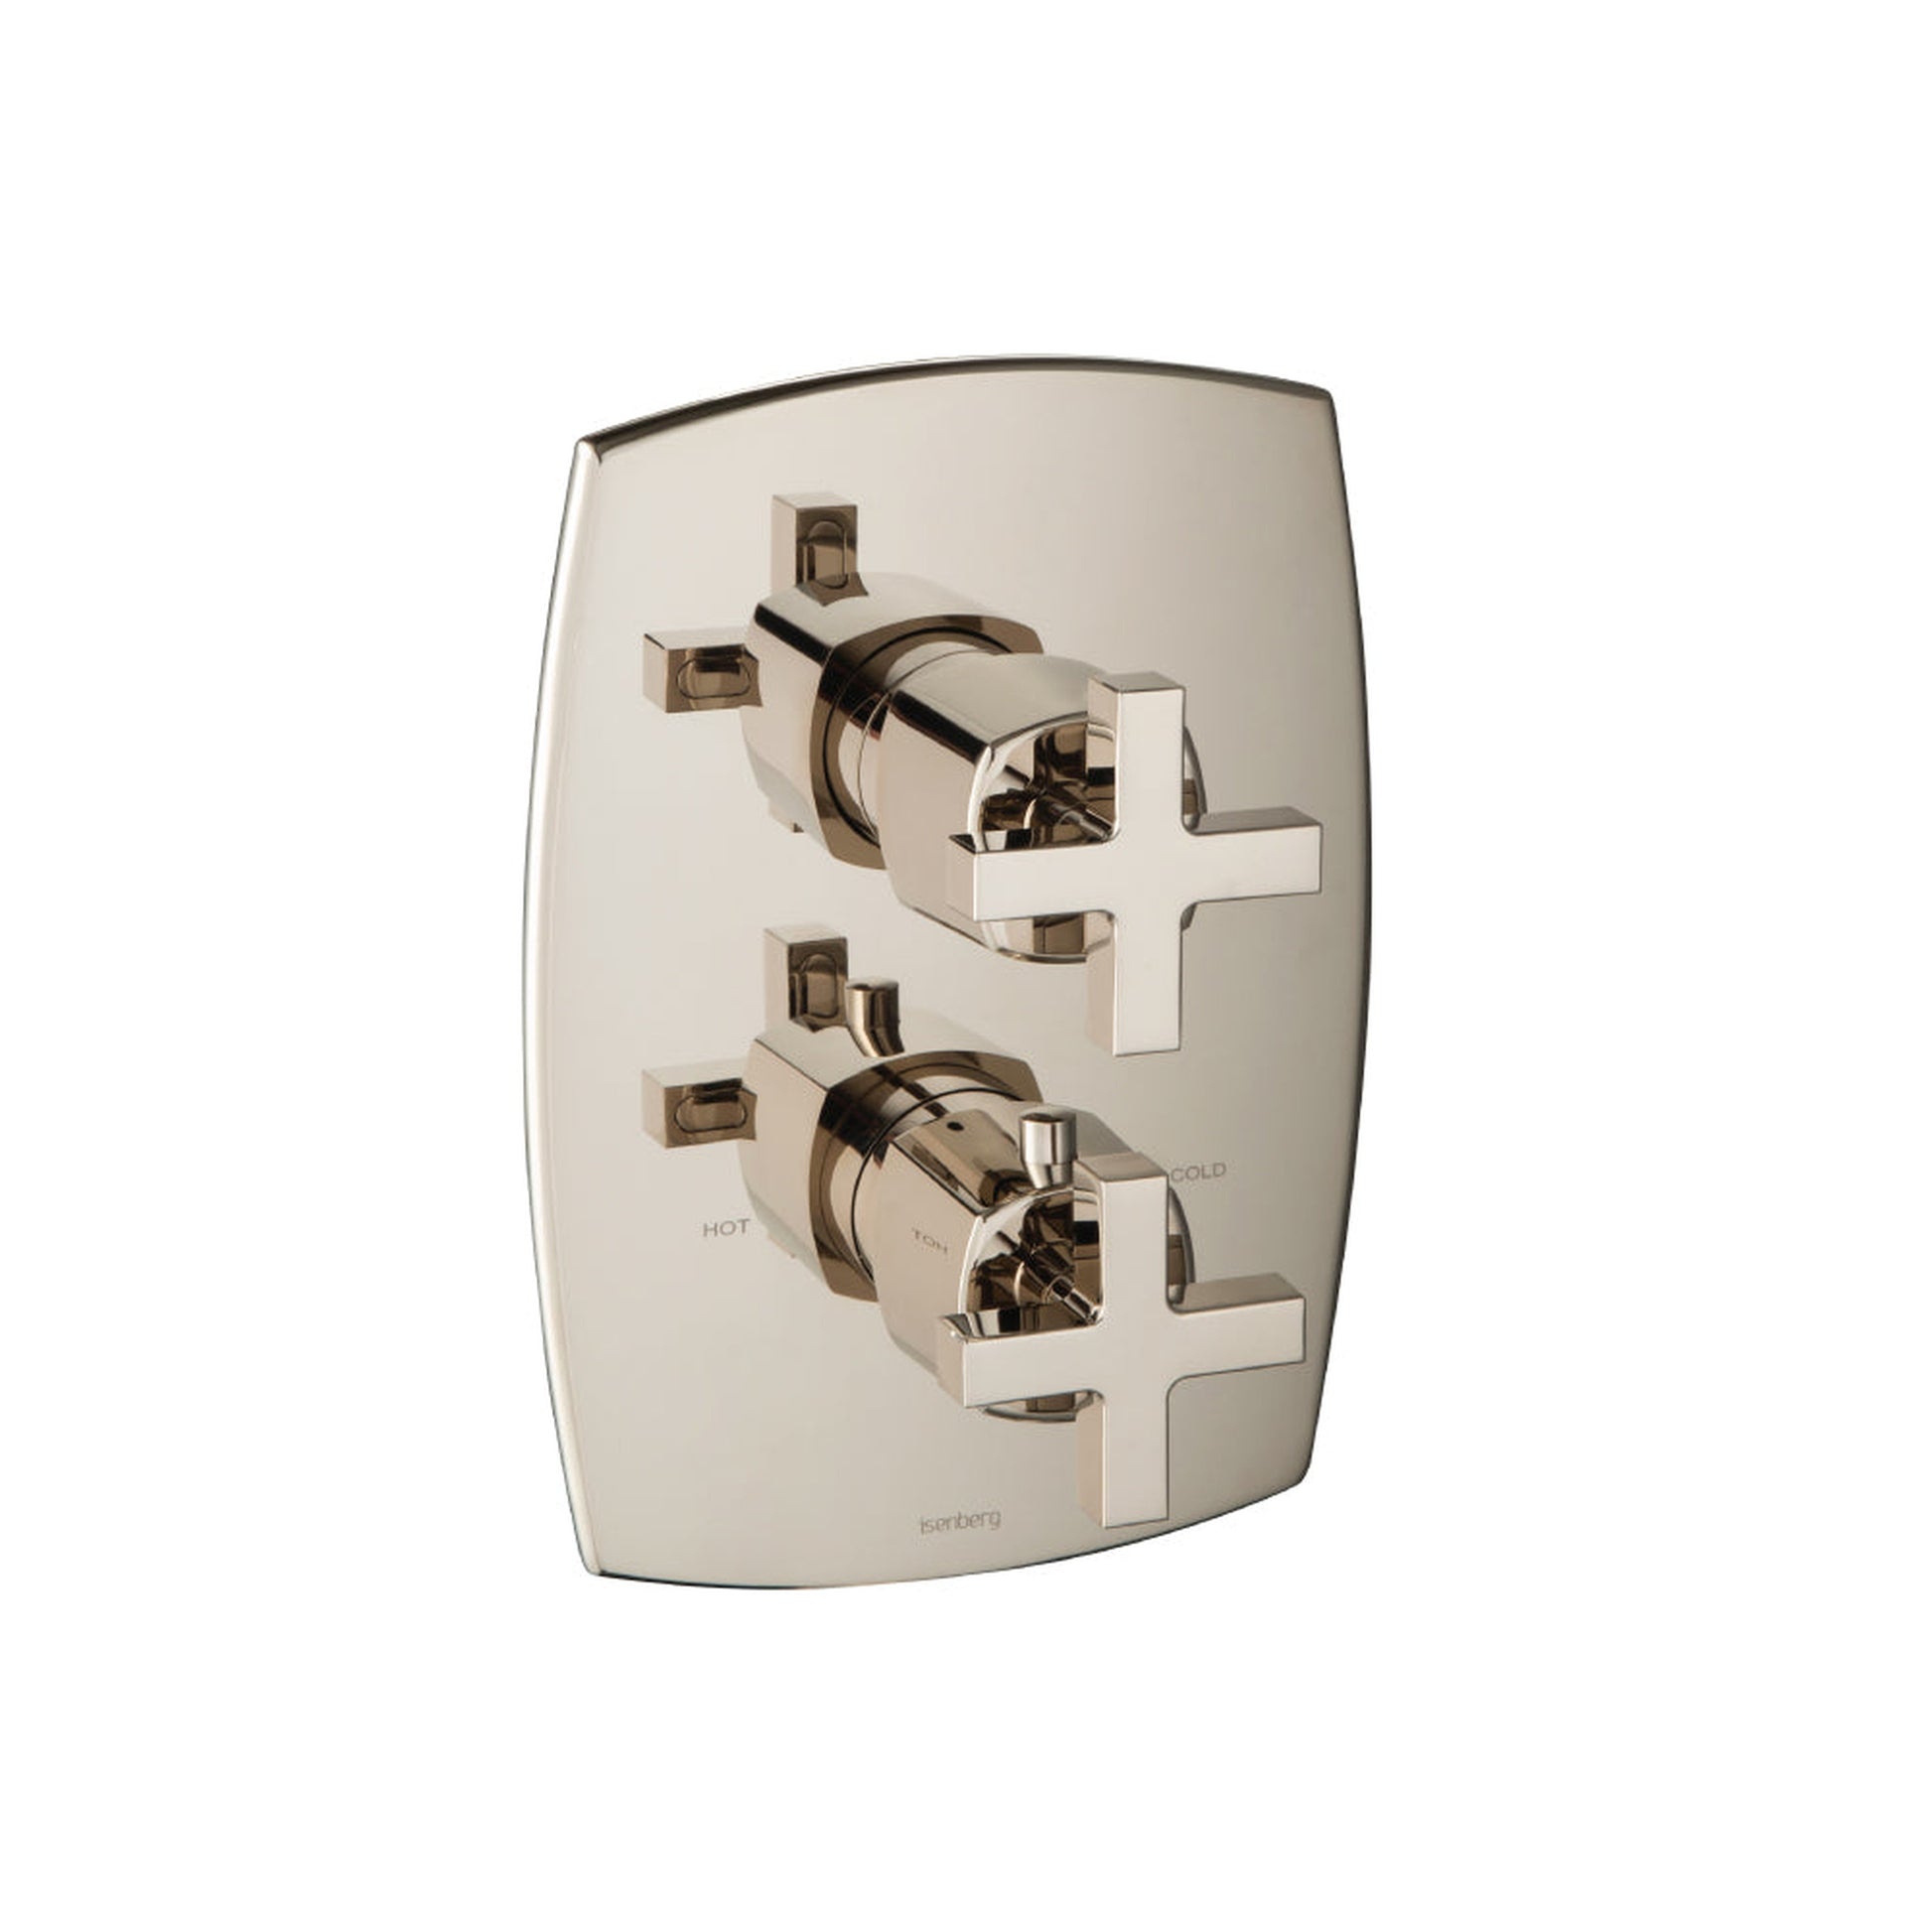 Isenberg Serie 240 Trim for Thermostatic Valve in Polished Nickel